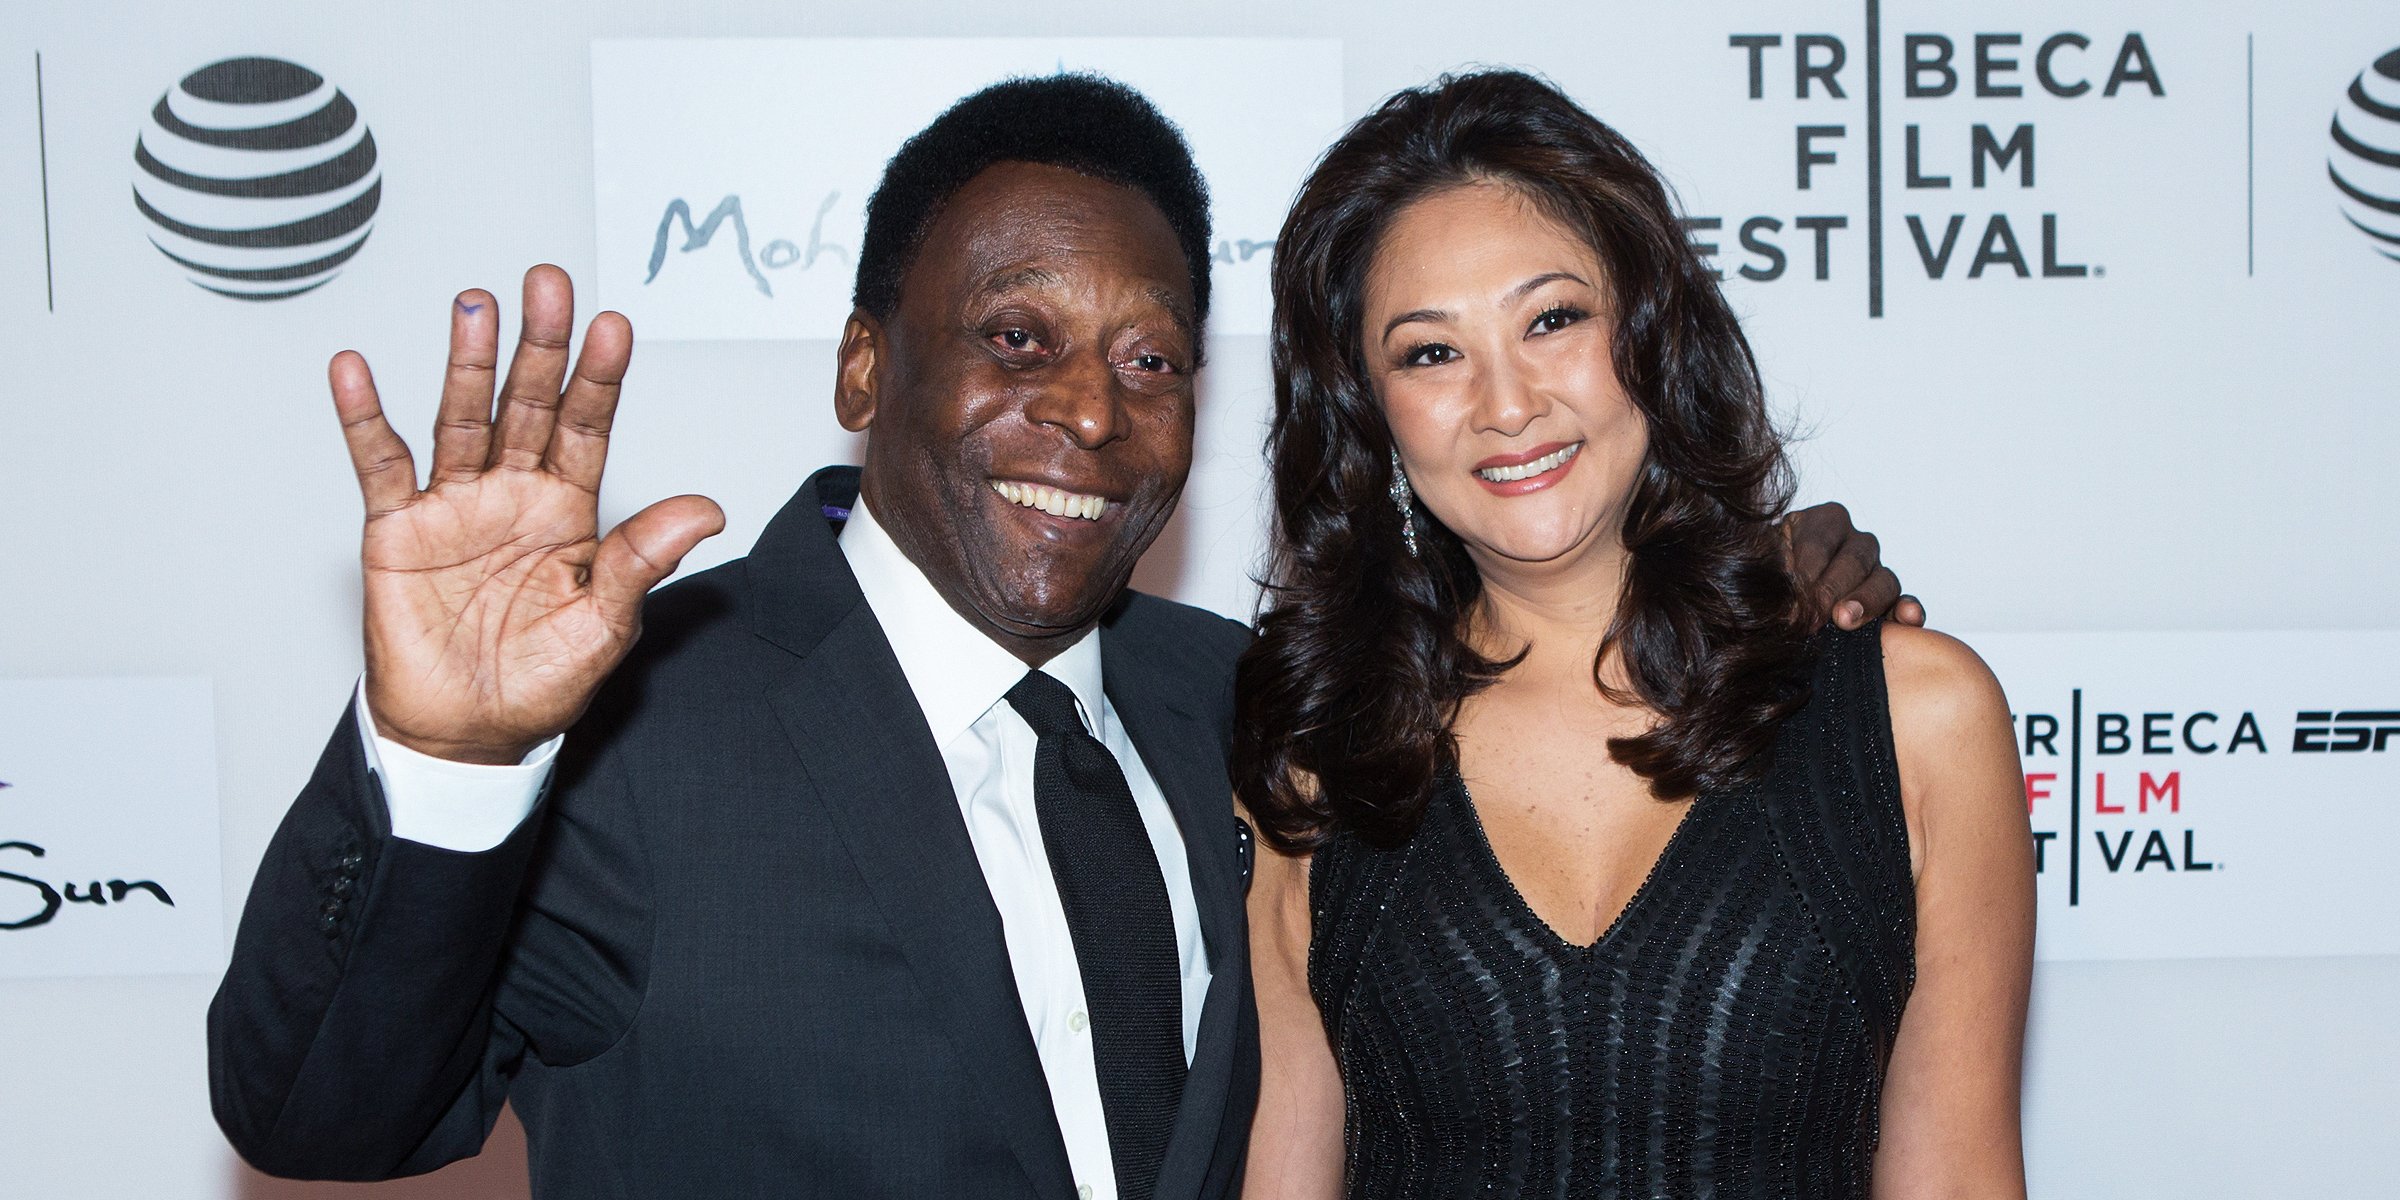 Pele and Marcia Aoki | Source: Getty Images